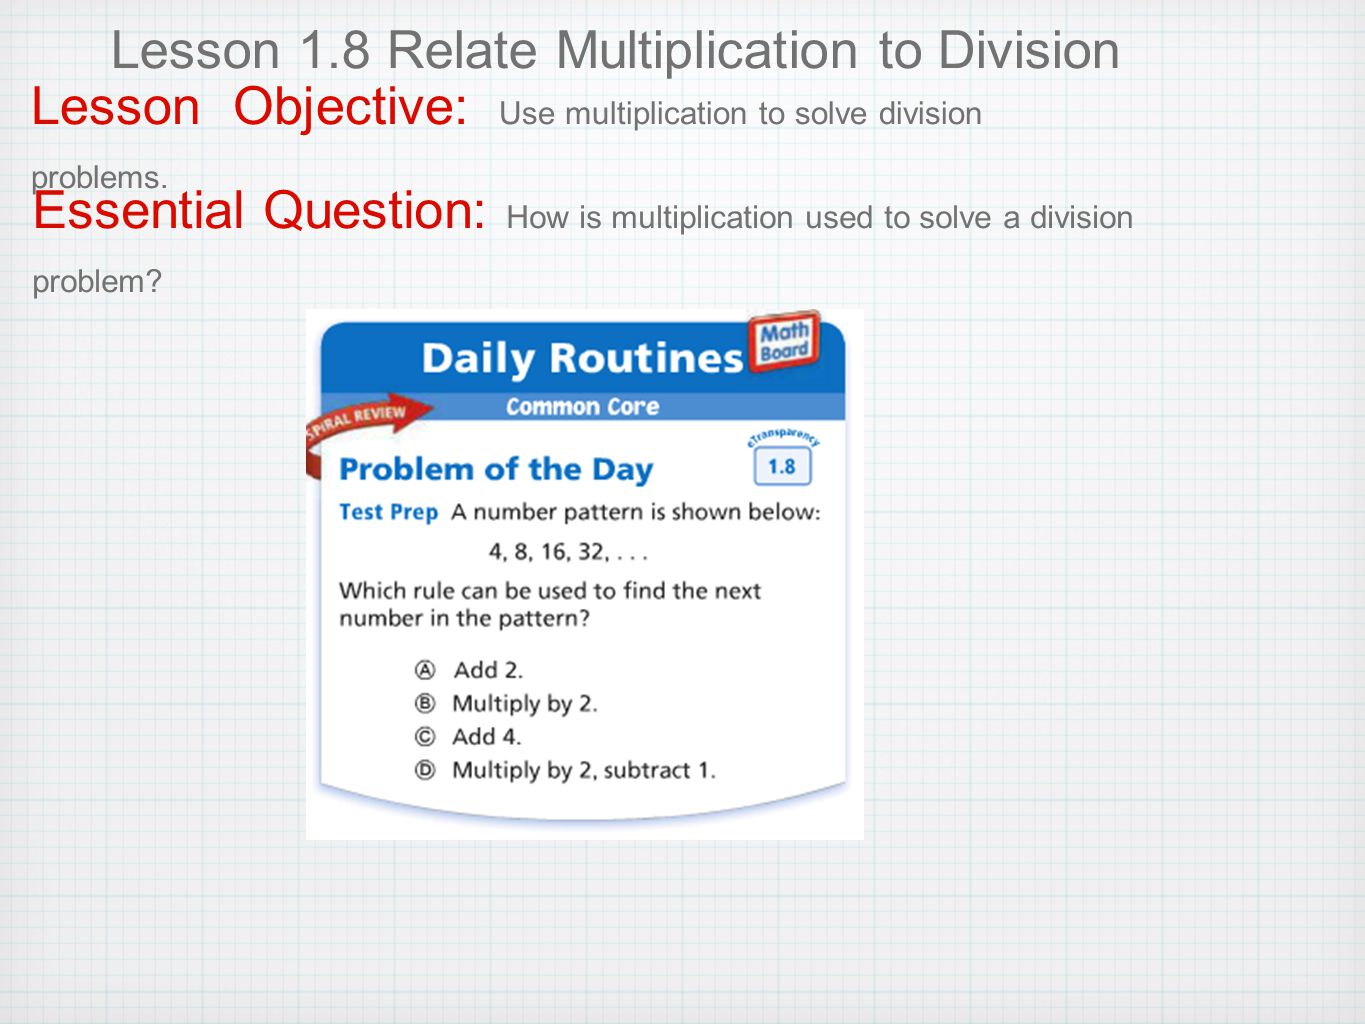 Lesson 1.8 Relate Multiplication to Division